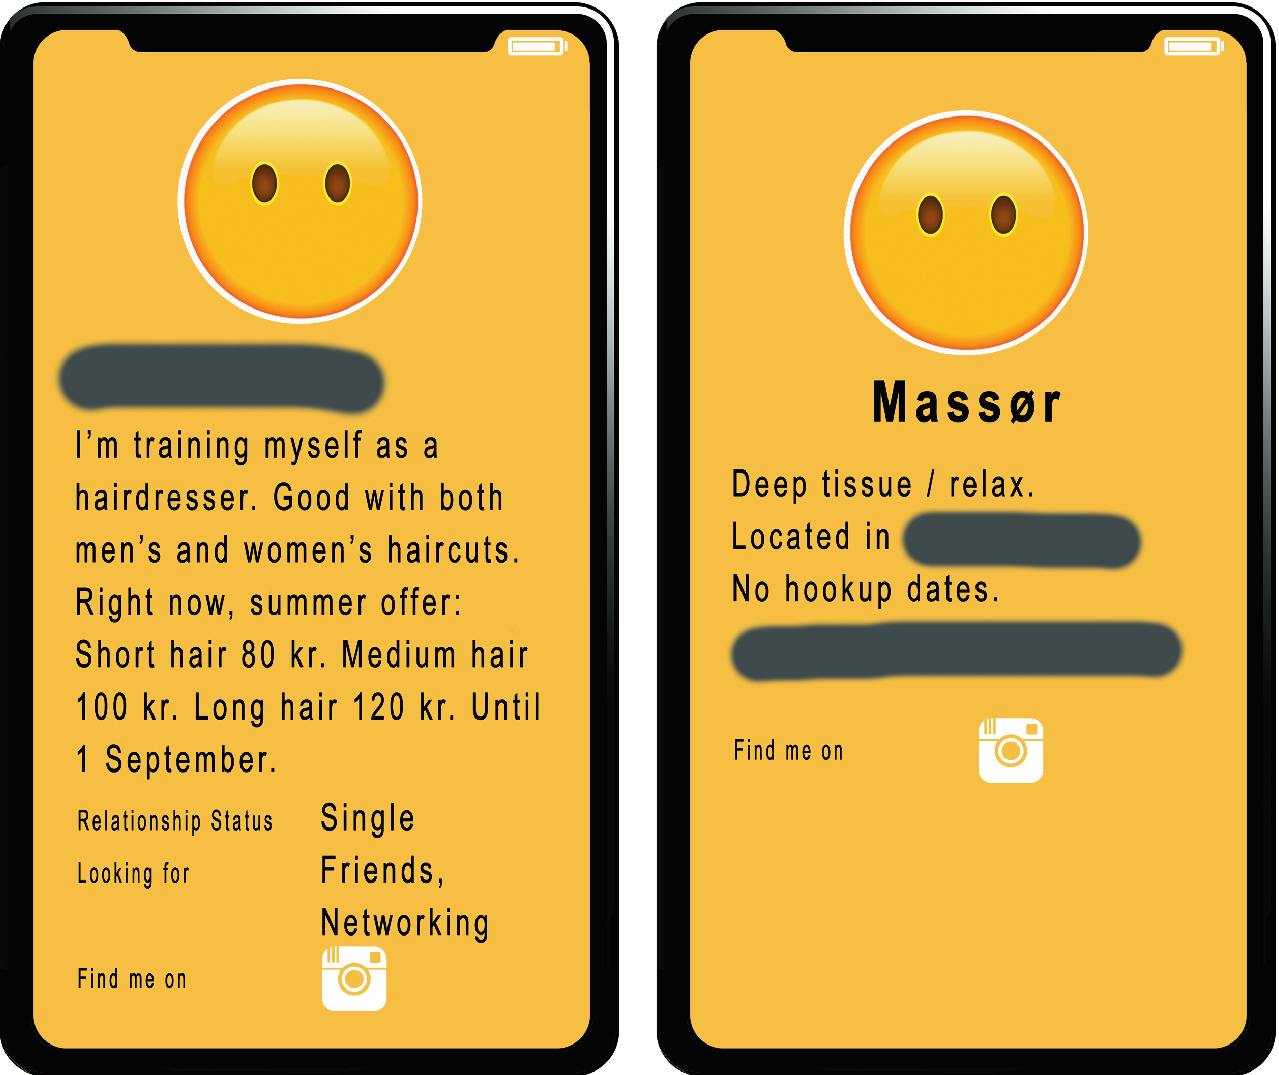 How to transfer grindr messages to new phone